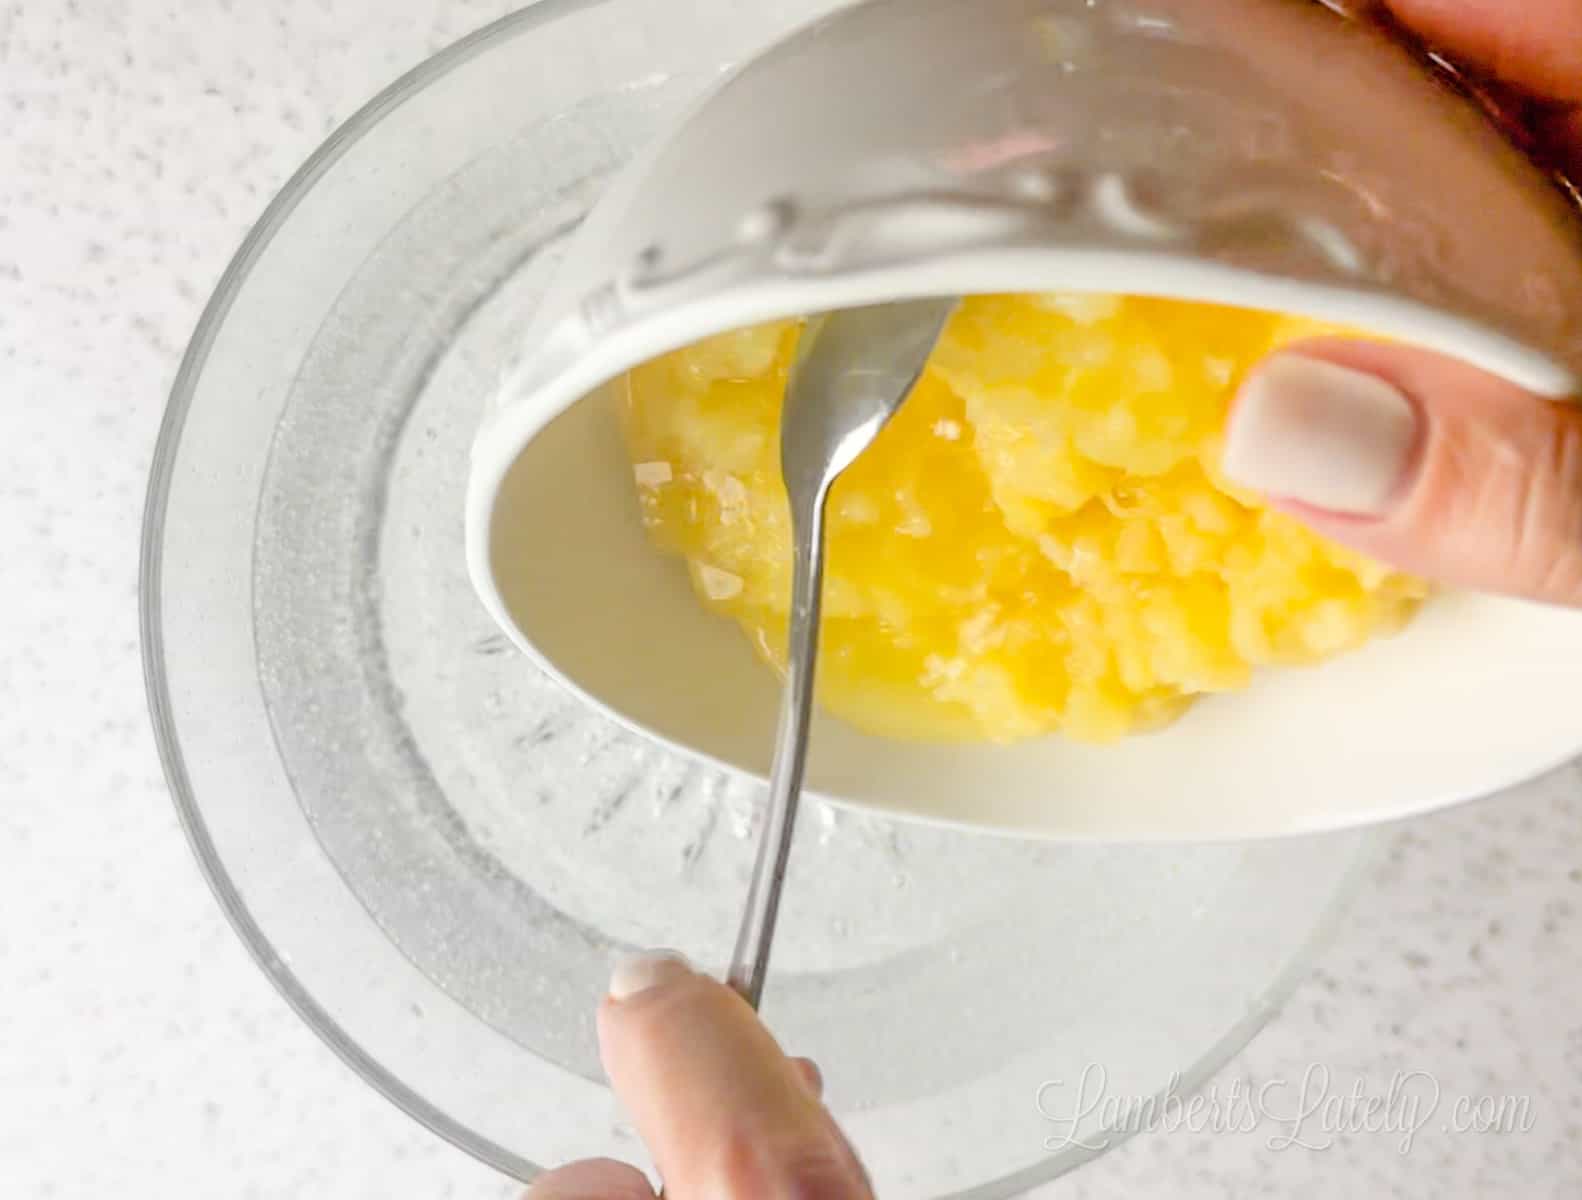 adding crushed pineapple to a punch bowl of lemon lime soda.